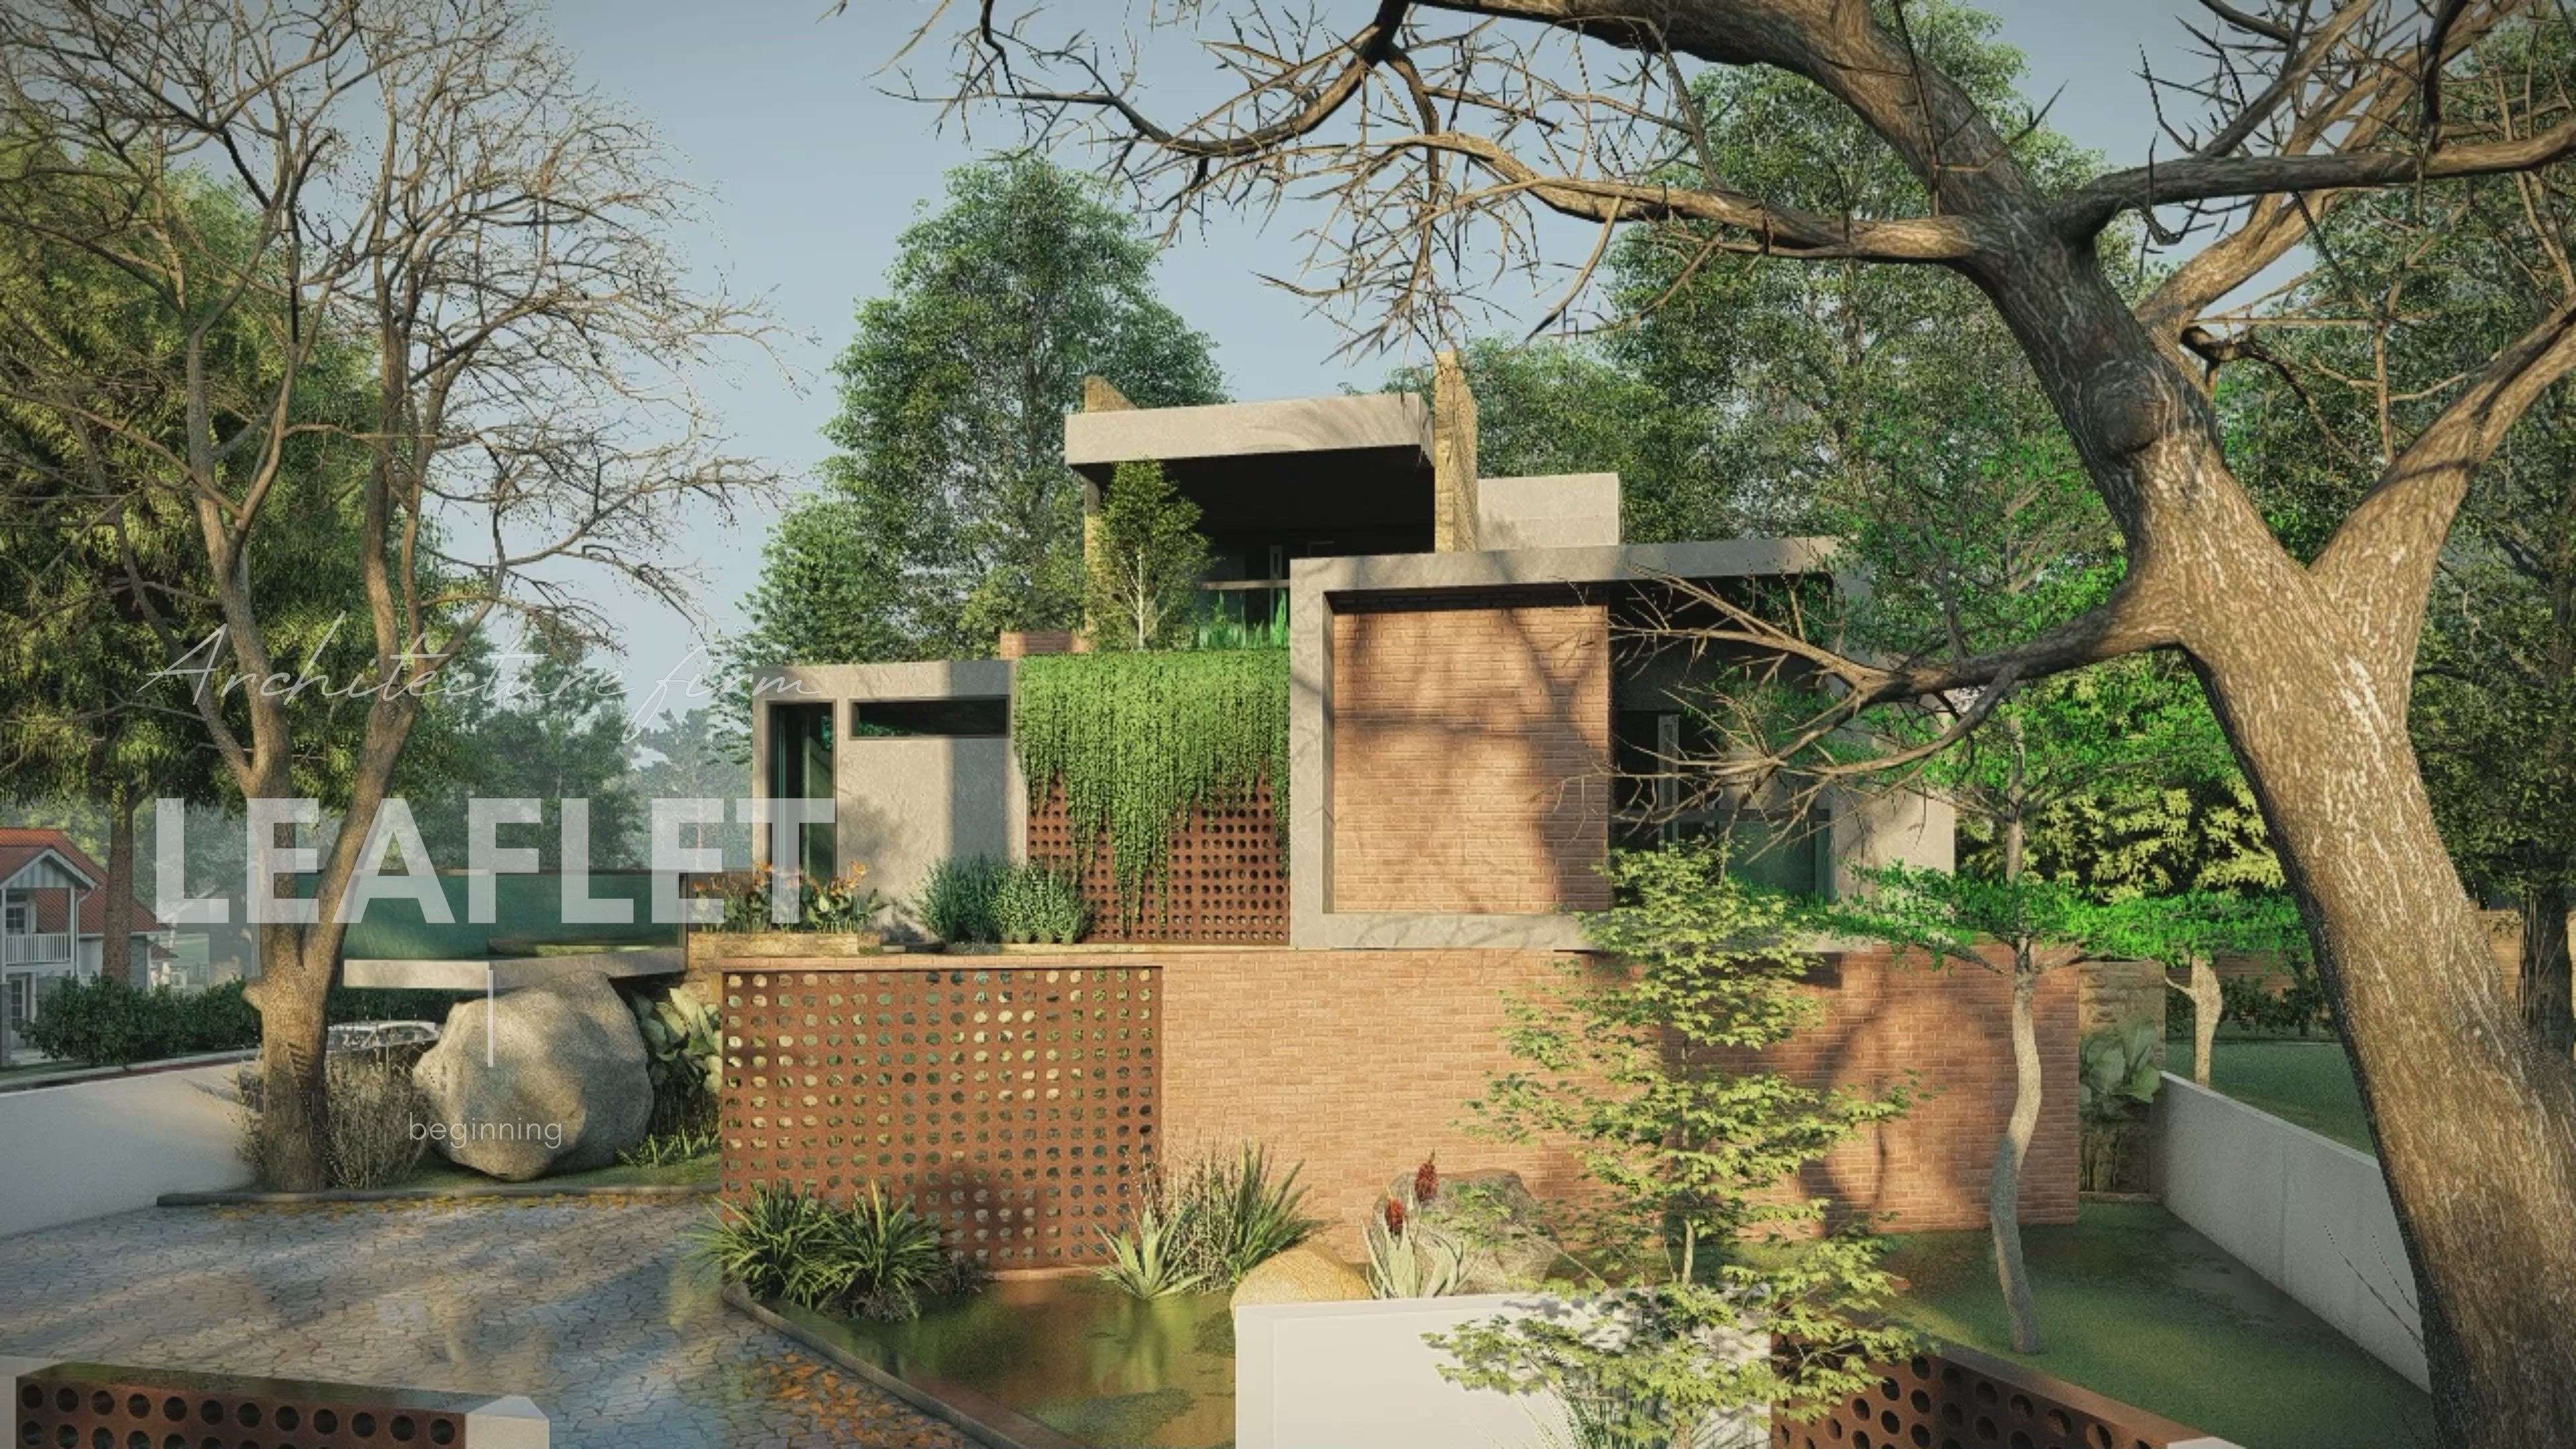 "SPACE OF PEACE"
 
#new_home  #contemporaryhomes  #sustainability  #architecturedesigns  #moderndesign  #Architect  #Architectural&nterior  #ElevationHome  #MrHomeKerala  #minimalisam  #greenhome  #naturallight  #earth  #world  #ElevationDesign  #renderlovers  #HouseDesigns  #Designs  #design #FlatRoof  #KeralaStyleHouse #kerala #MrHomeKerala#minimal  #Minimalistic  #minimalisum  #minimalistdesigns  #kerala_architecture  #indiadesign   #indianarchitecturel  #dailydesign  #LandscapeGarden  #Landscape    #LandscapeDesign  #landscapearchitecture  #keralaplanners #contemporary  #traditiinal  #ContemporaryDesigns  #semi_contemporary_home_design  #traditionaltouch  #Mixedstyle  #contruction  #naturefriendly  #naturalstones  #naturelove